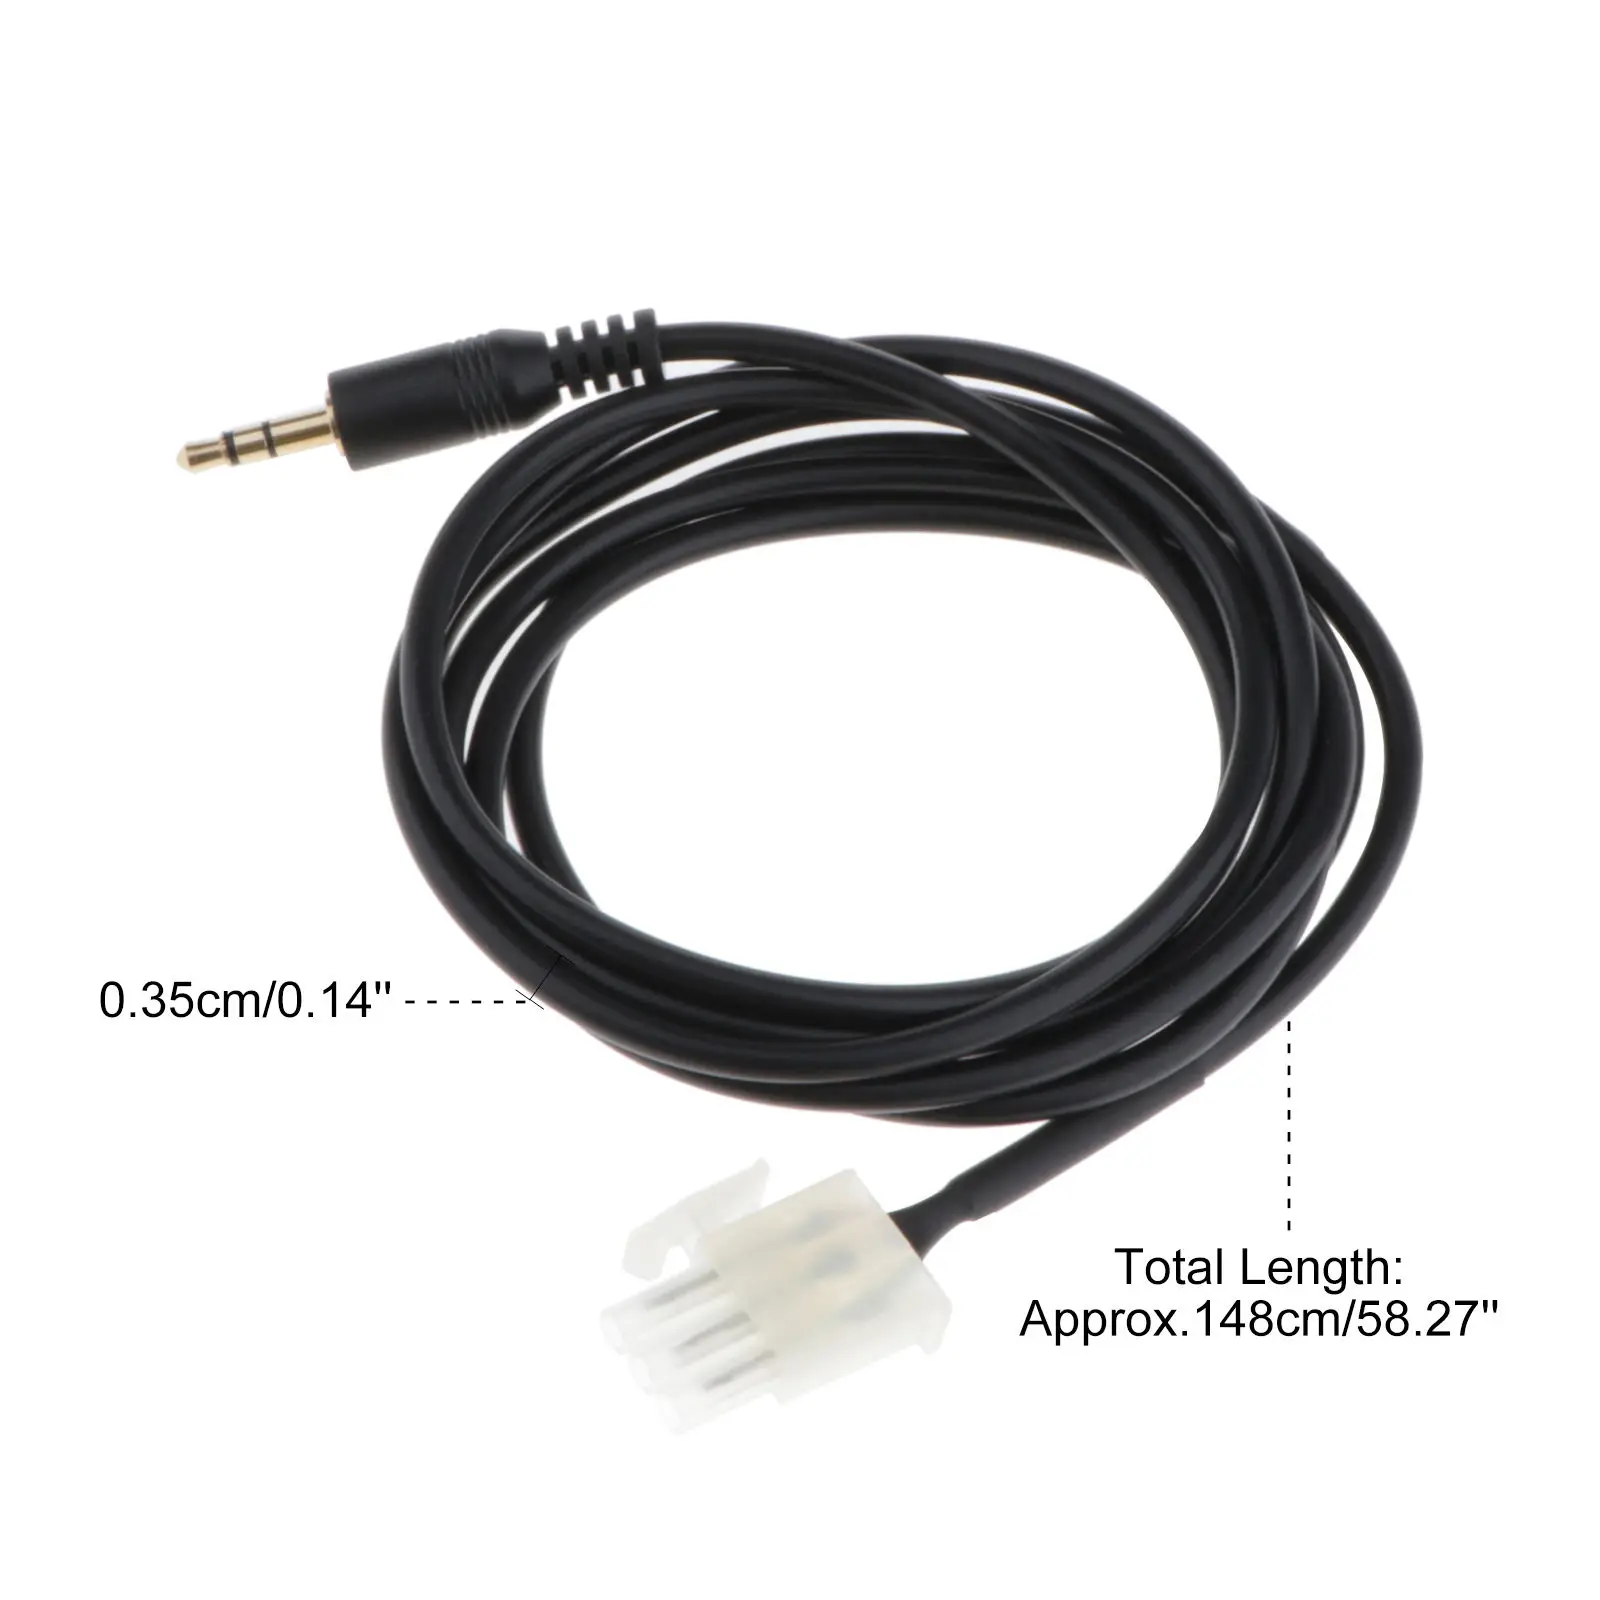 3.5mm Motorcycle AUX Audio Cable Male Line 3-PIN For Honda GL1800 Goldwing